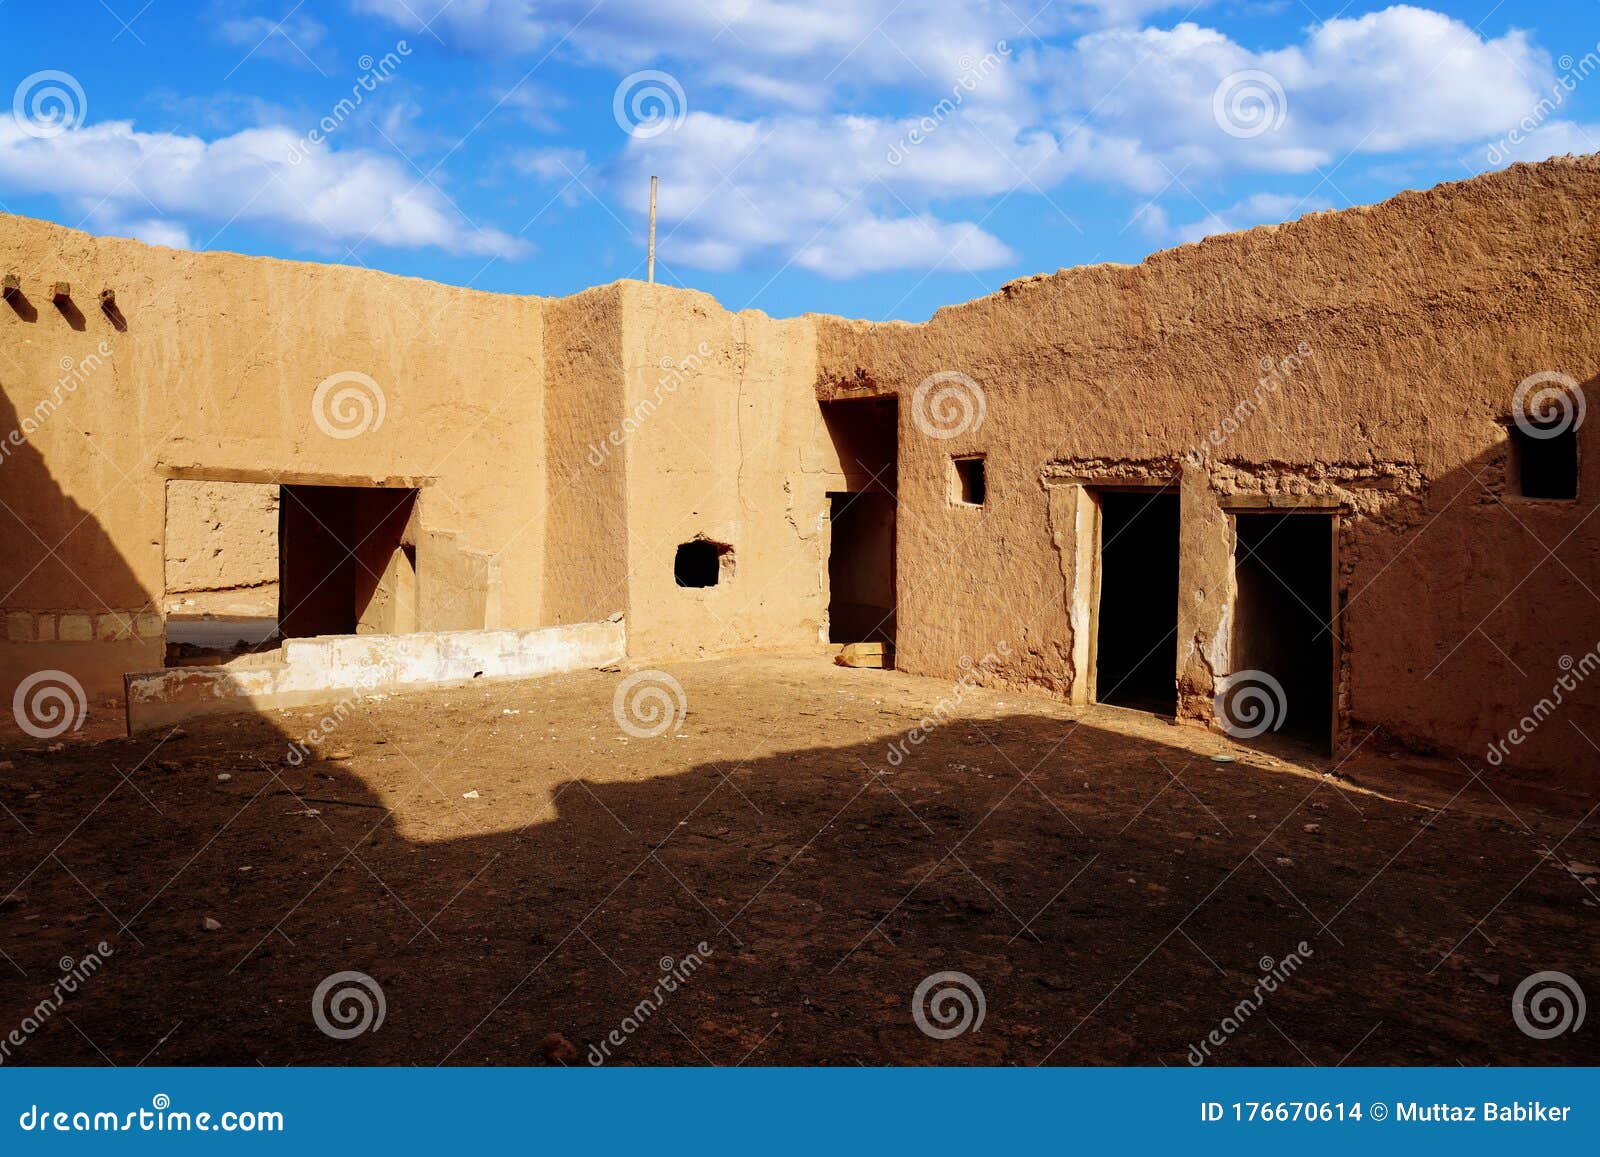 traditional old arabian house abandoned or mud-brick house